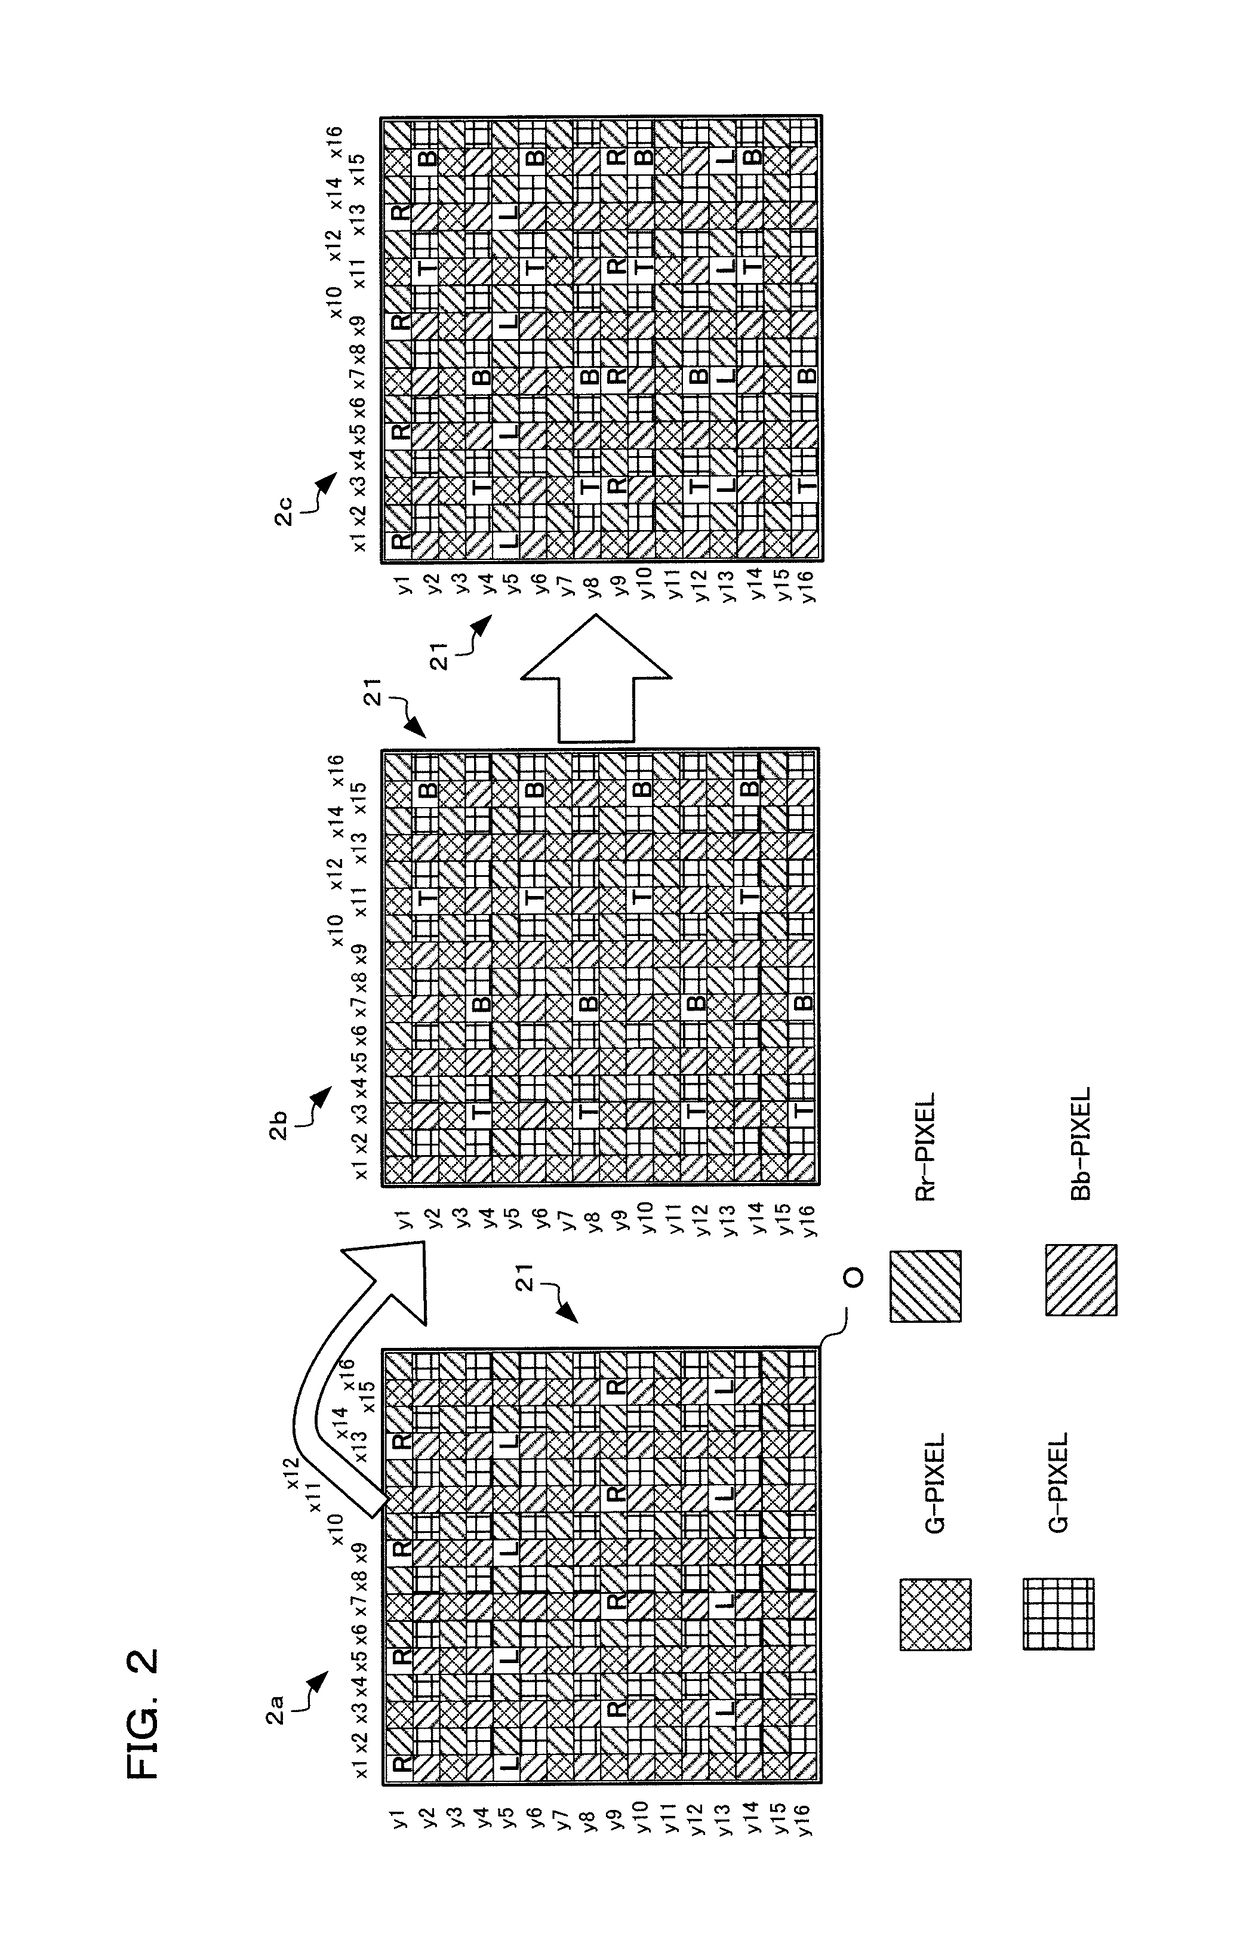 Image sensor and imaging device